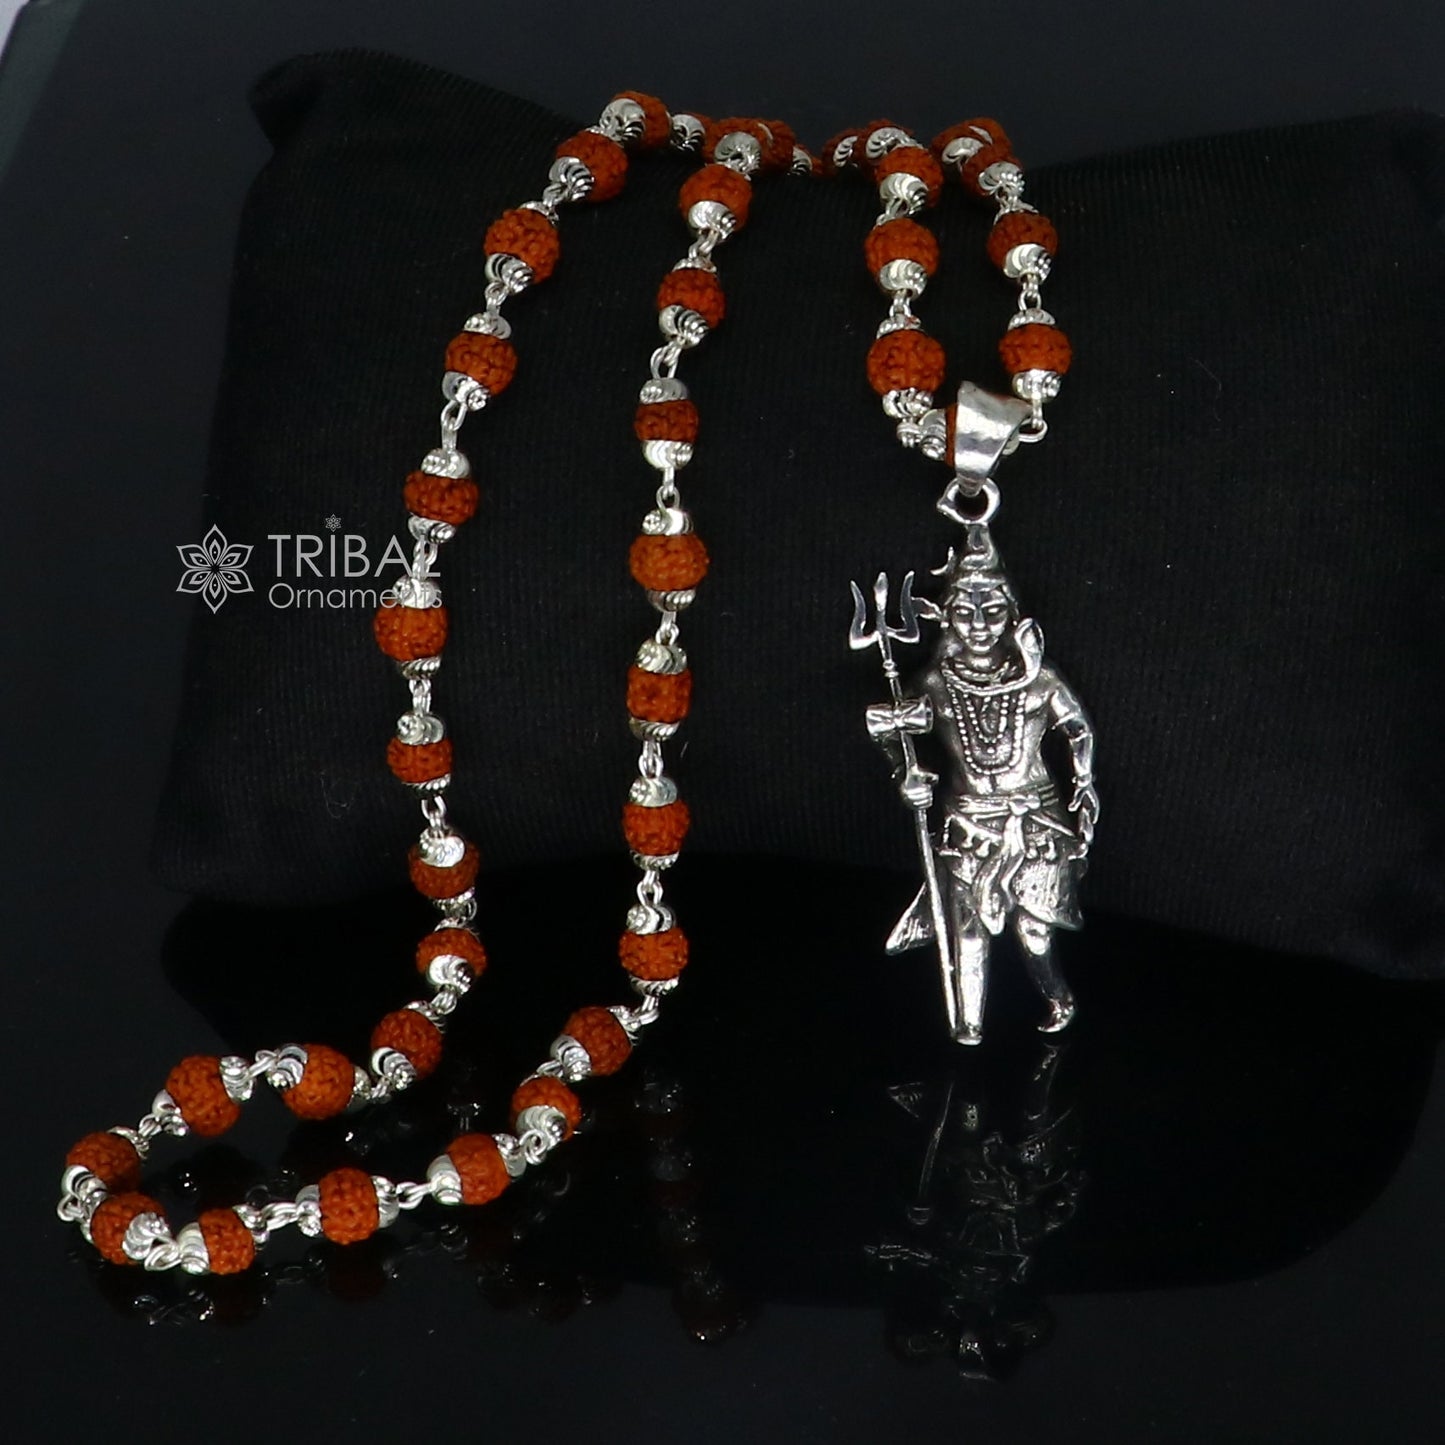 925 sterling silver handmade Divine Lord shiva with trident pendant & Rudraksha chain, holy pendant protect from negative energy nsp756 - TRIBAL ORNAMENTS